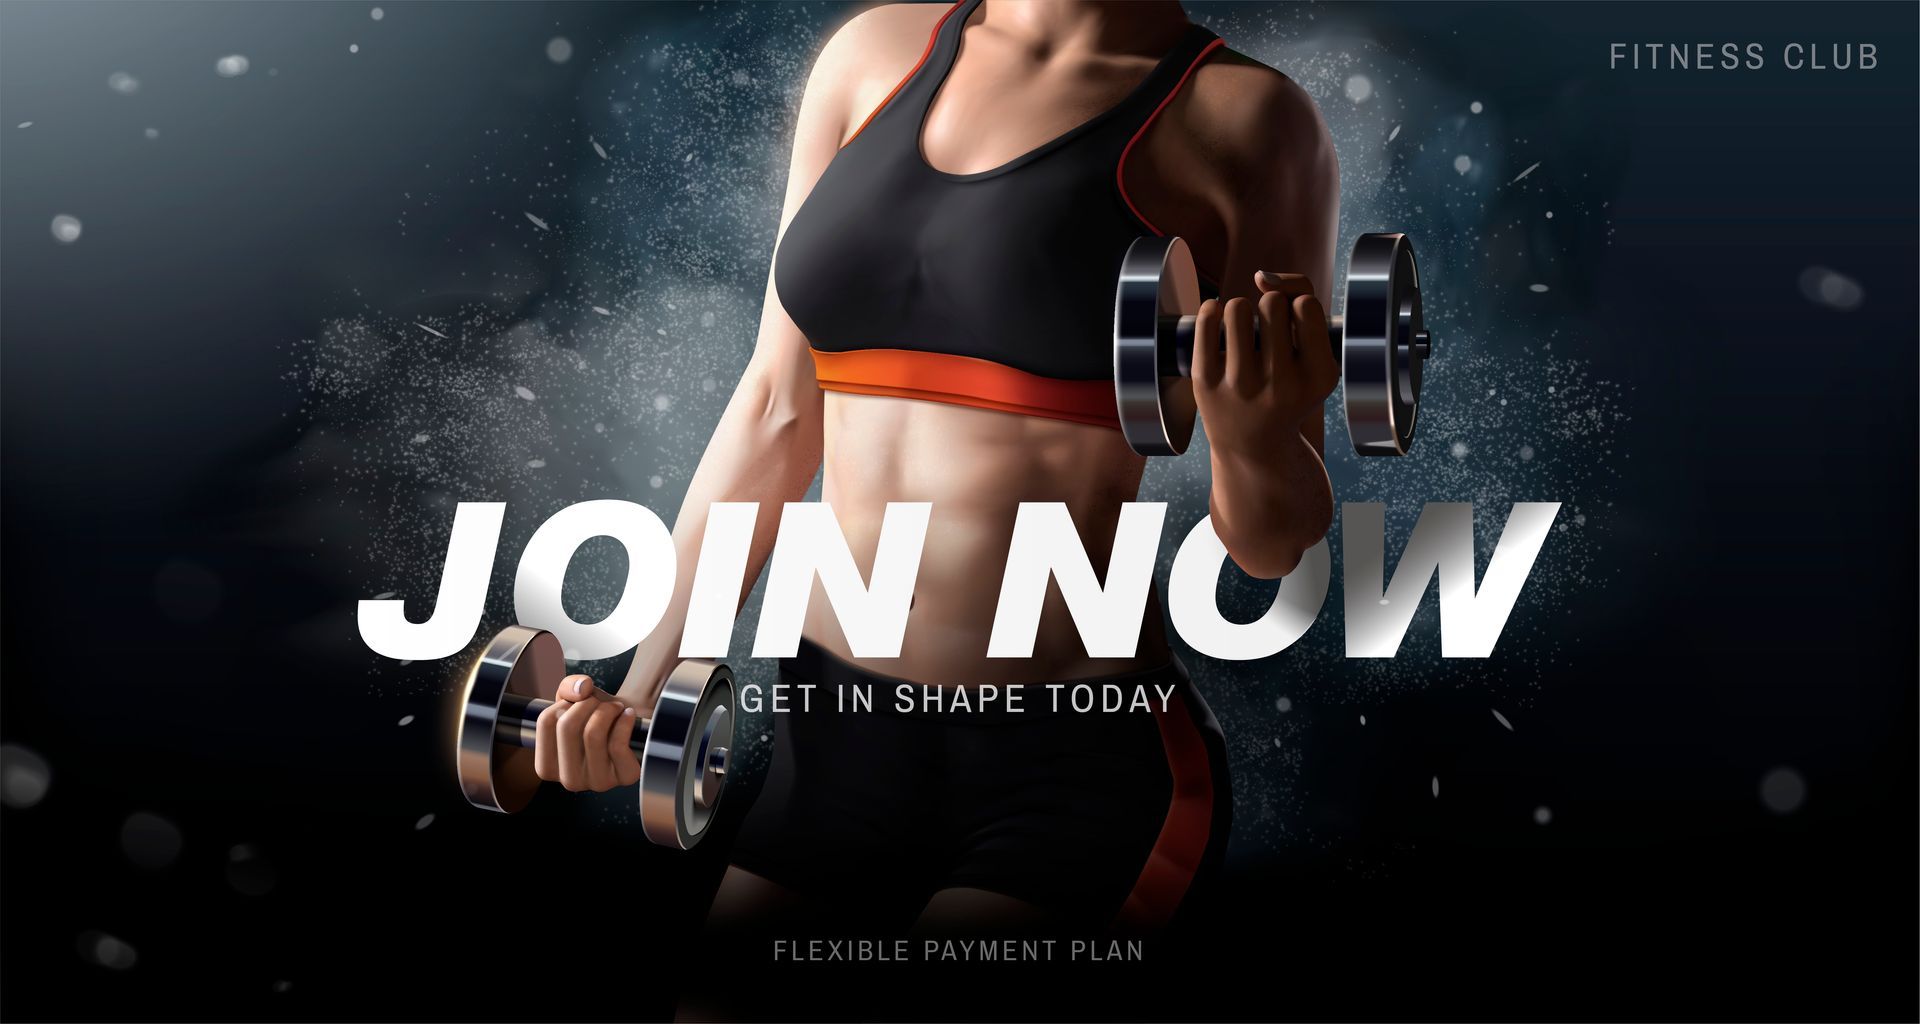 an ad for a fitness club shows a woman lifting dumbbells to promote online membership offers